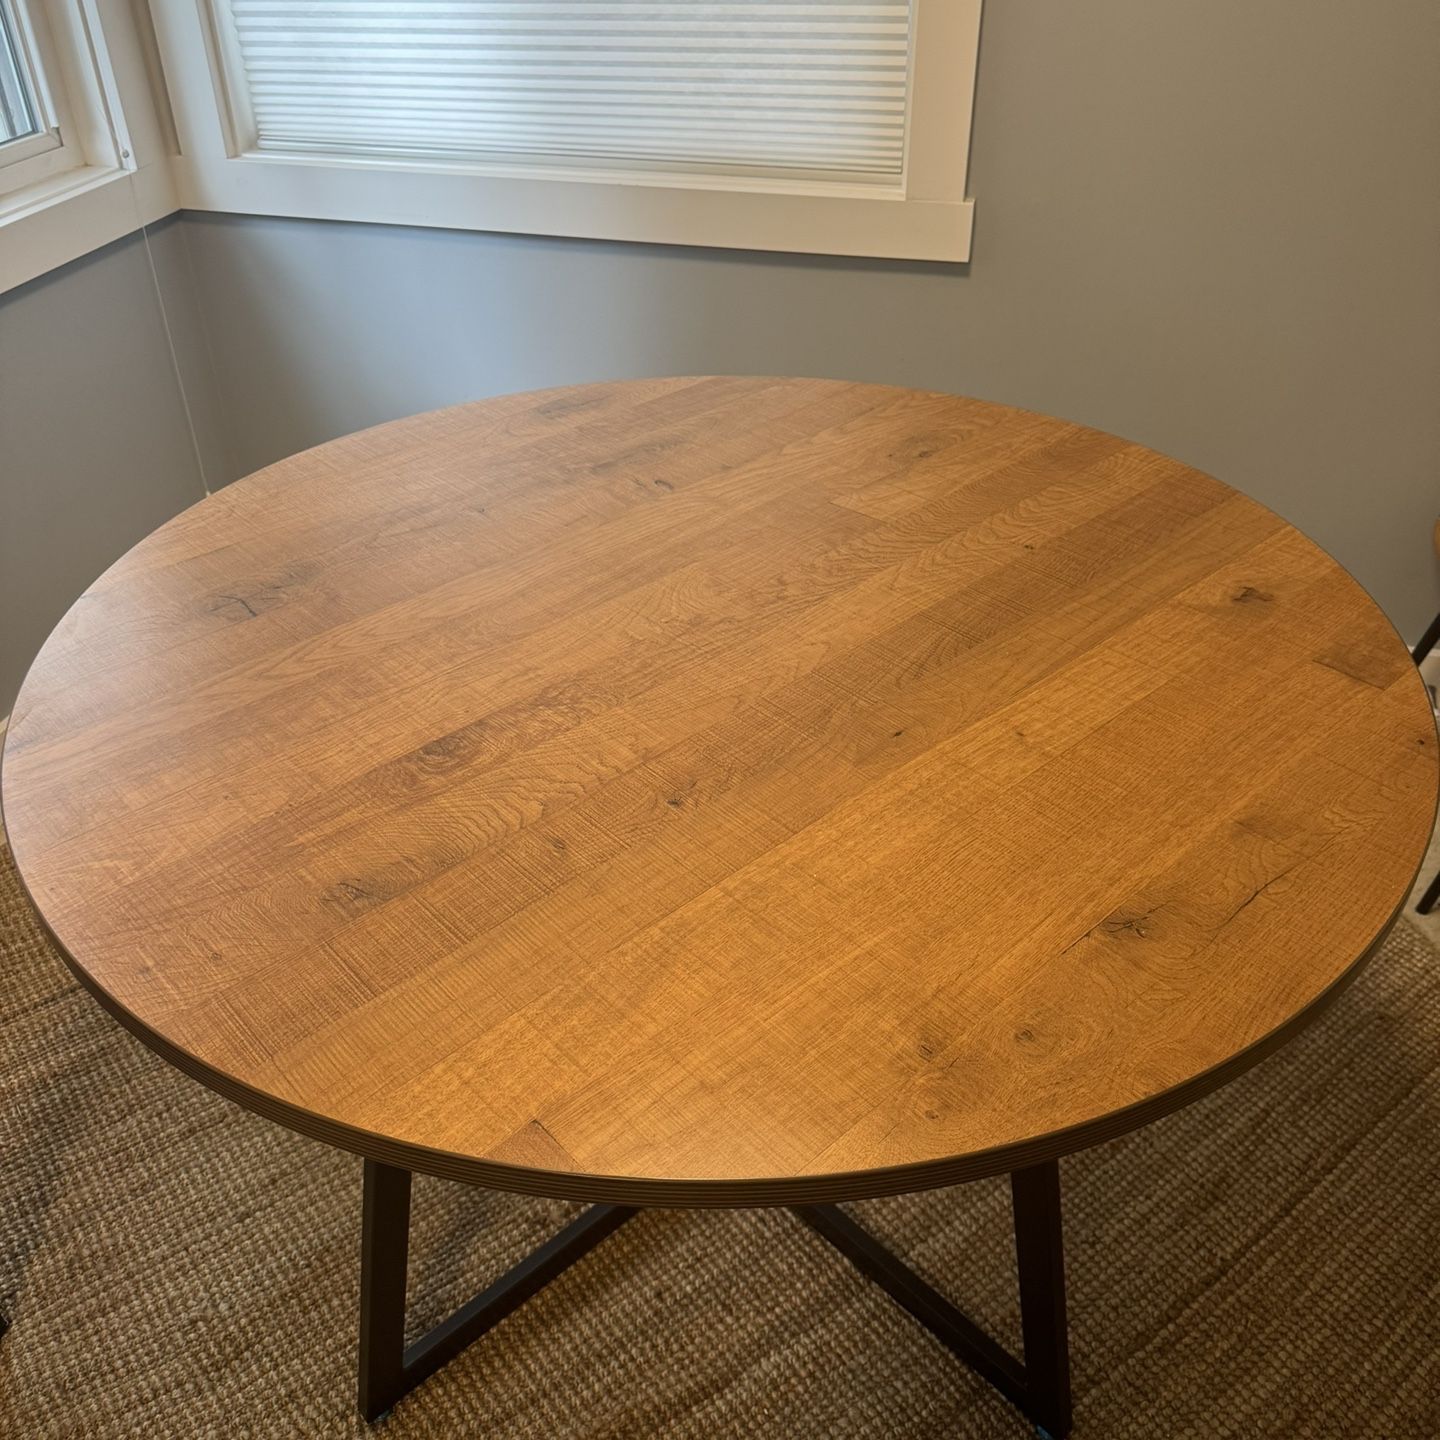 Dining table with 4 Chairs